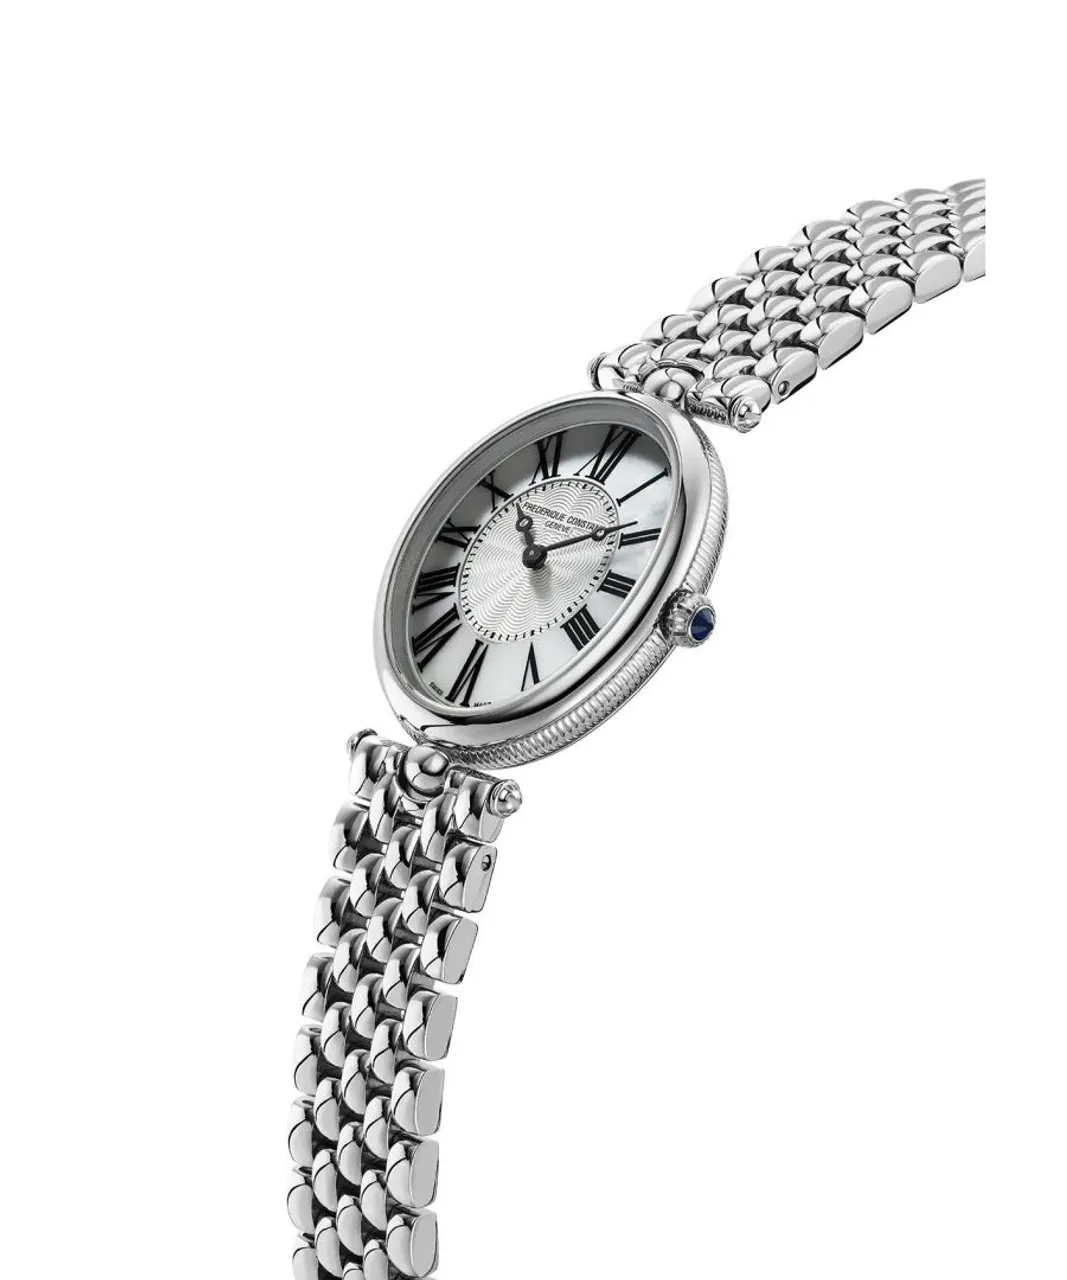 Frederique Constant Frédérique Art Deco WoMens Silver Watch FC-200MPW2V6B Stainless Steel (archived) - One Size